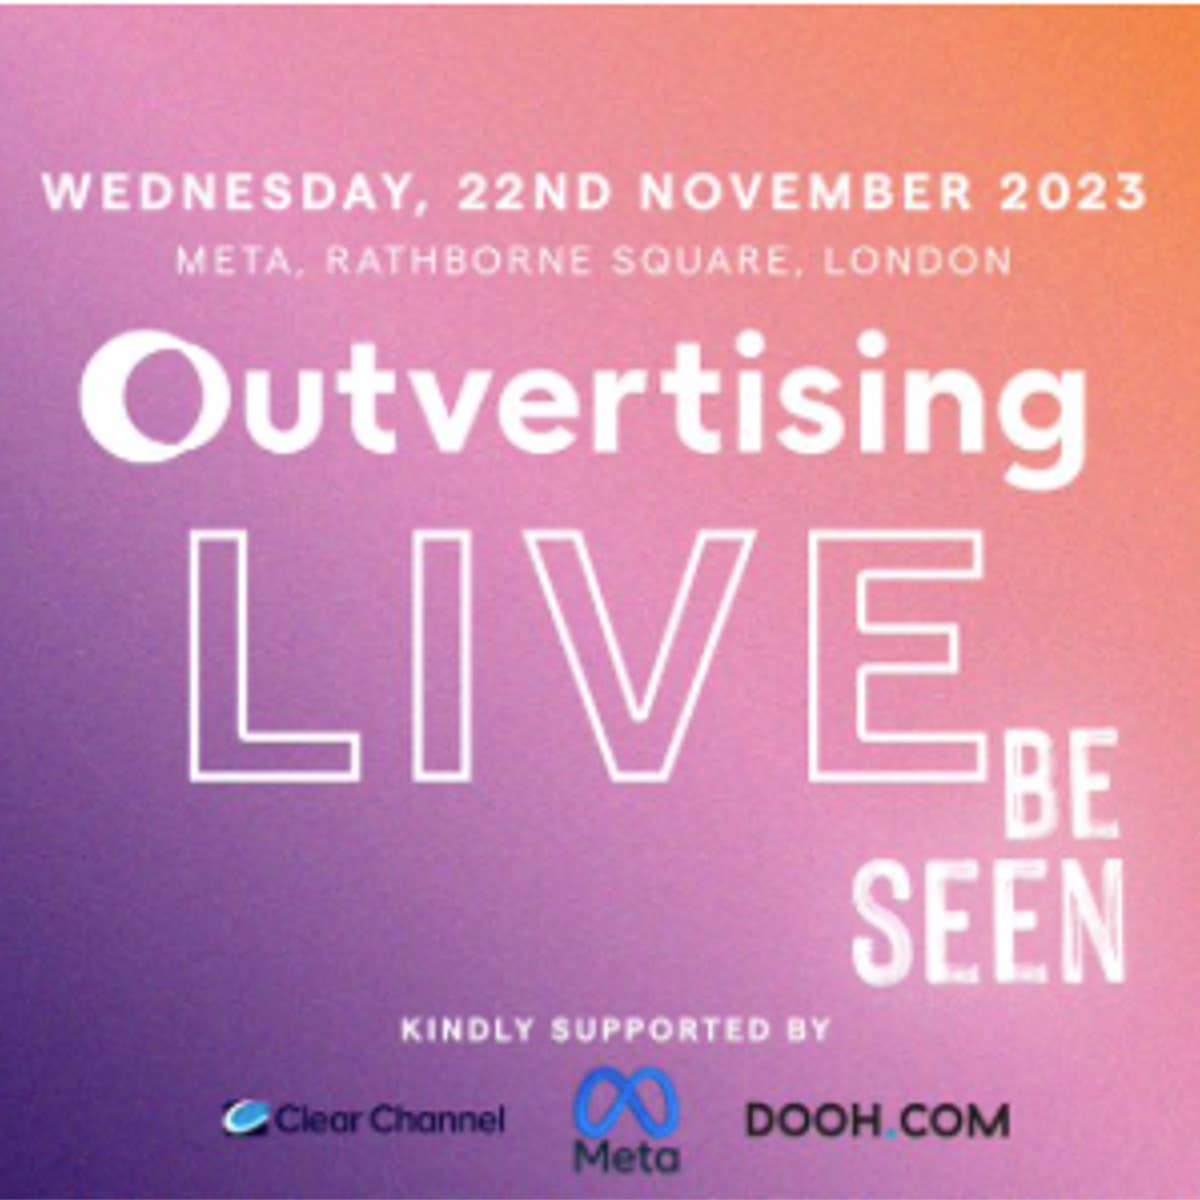 Outvertising Live - Where the day job and gay job collide